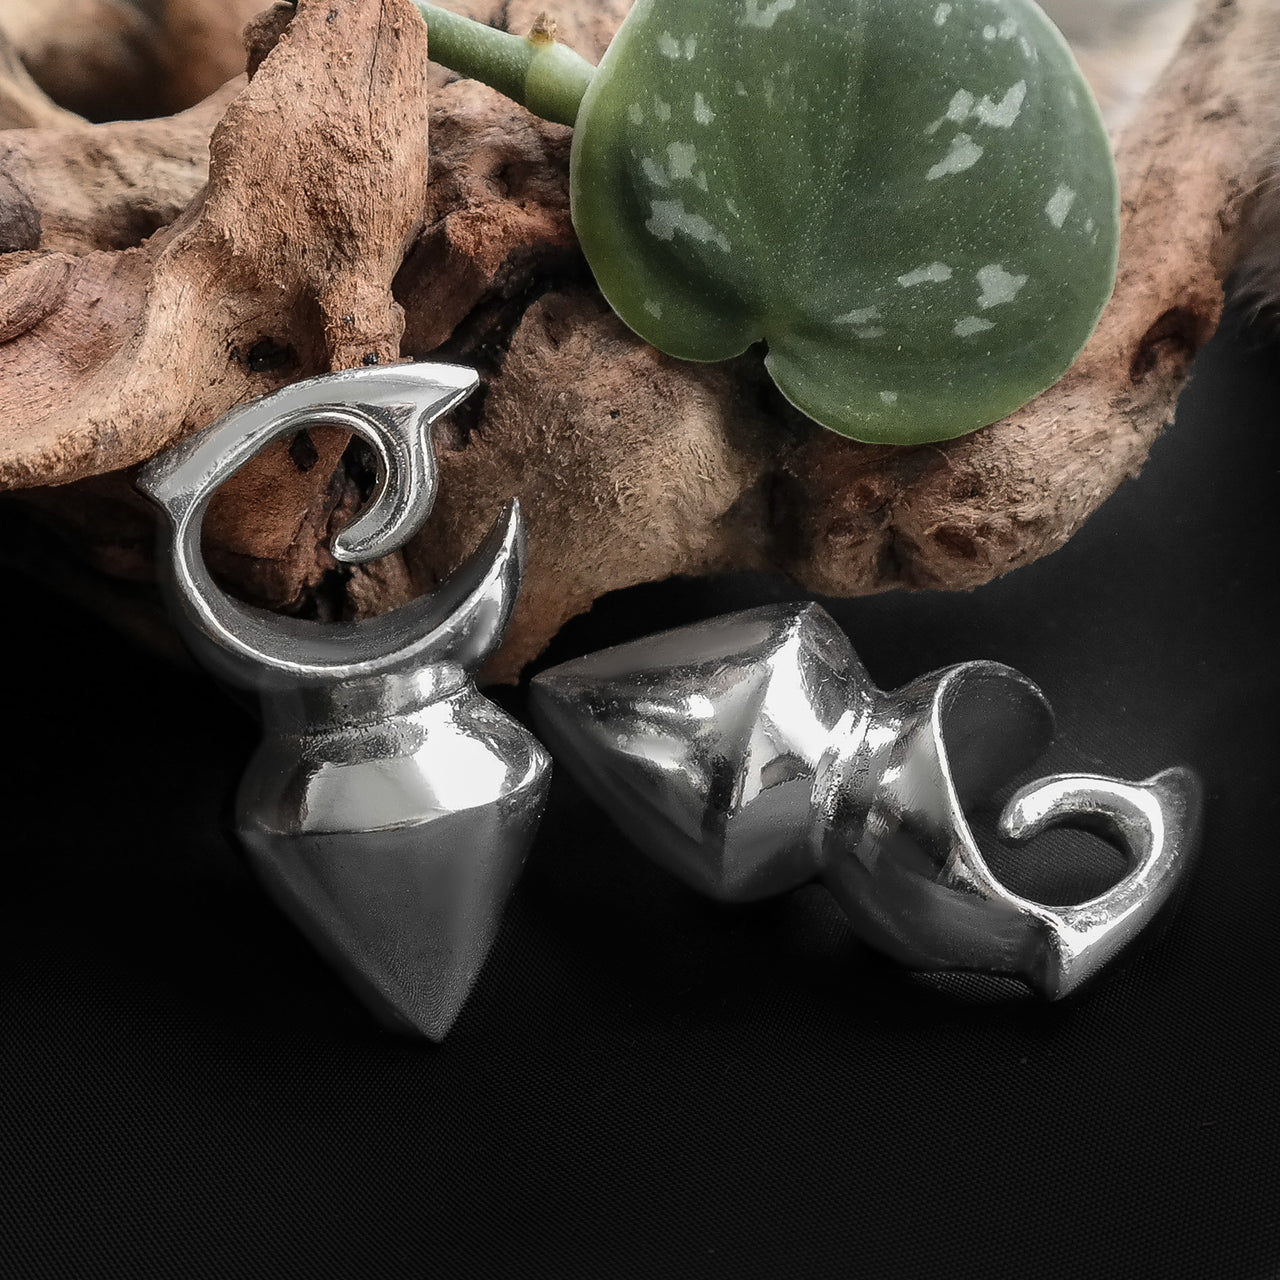 Silver Borneo Ear Weights